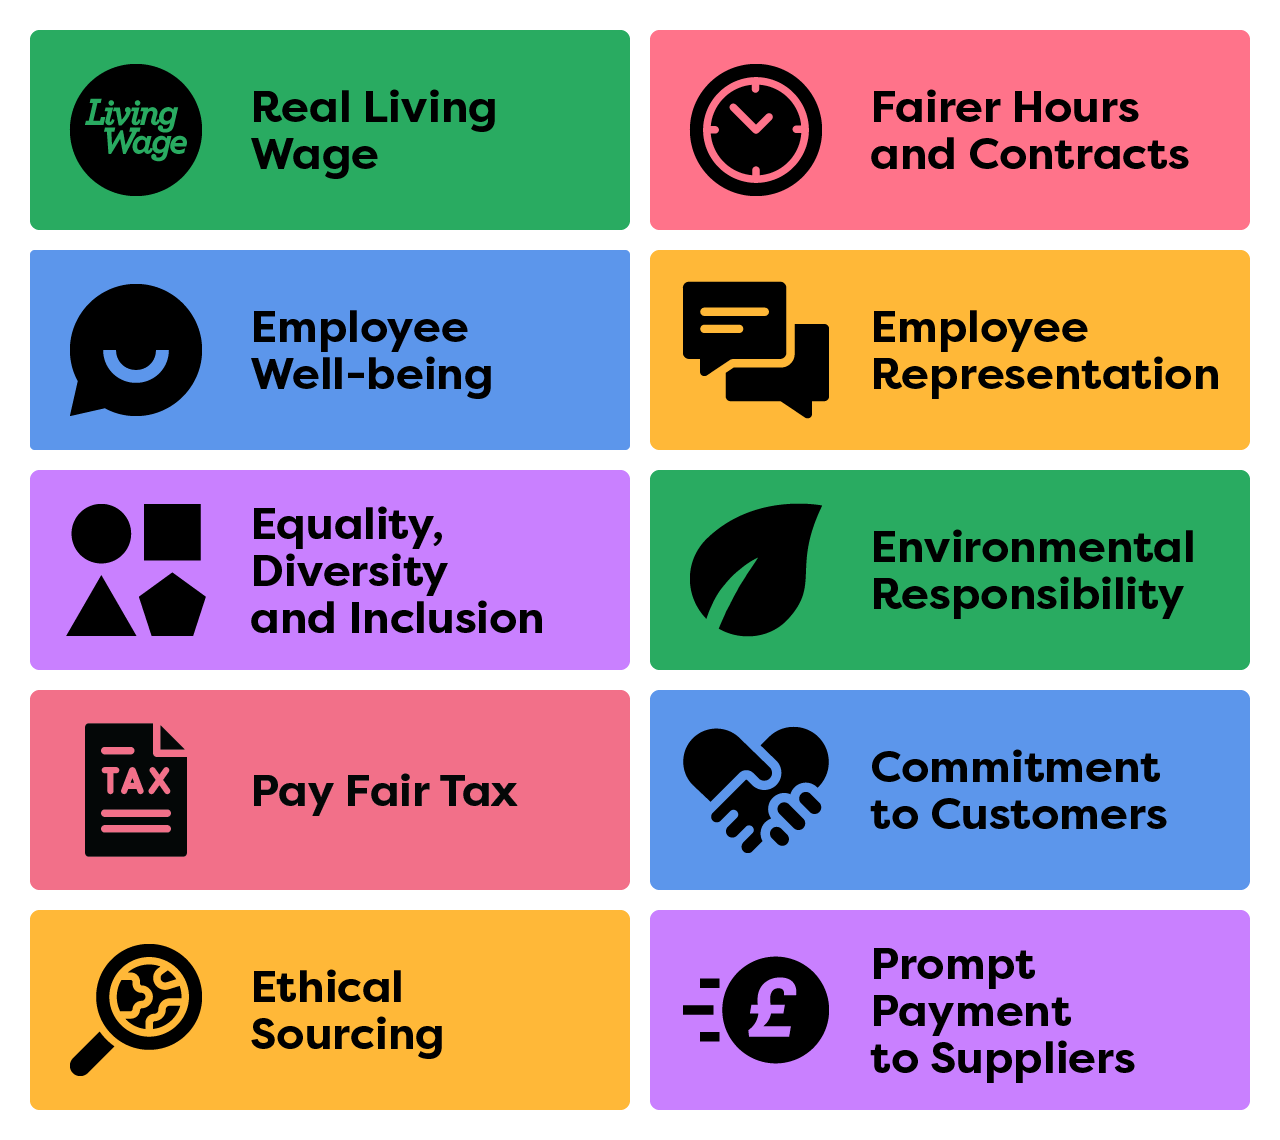 1 Real Living Wage – what we expect